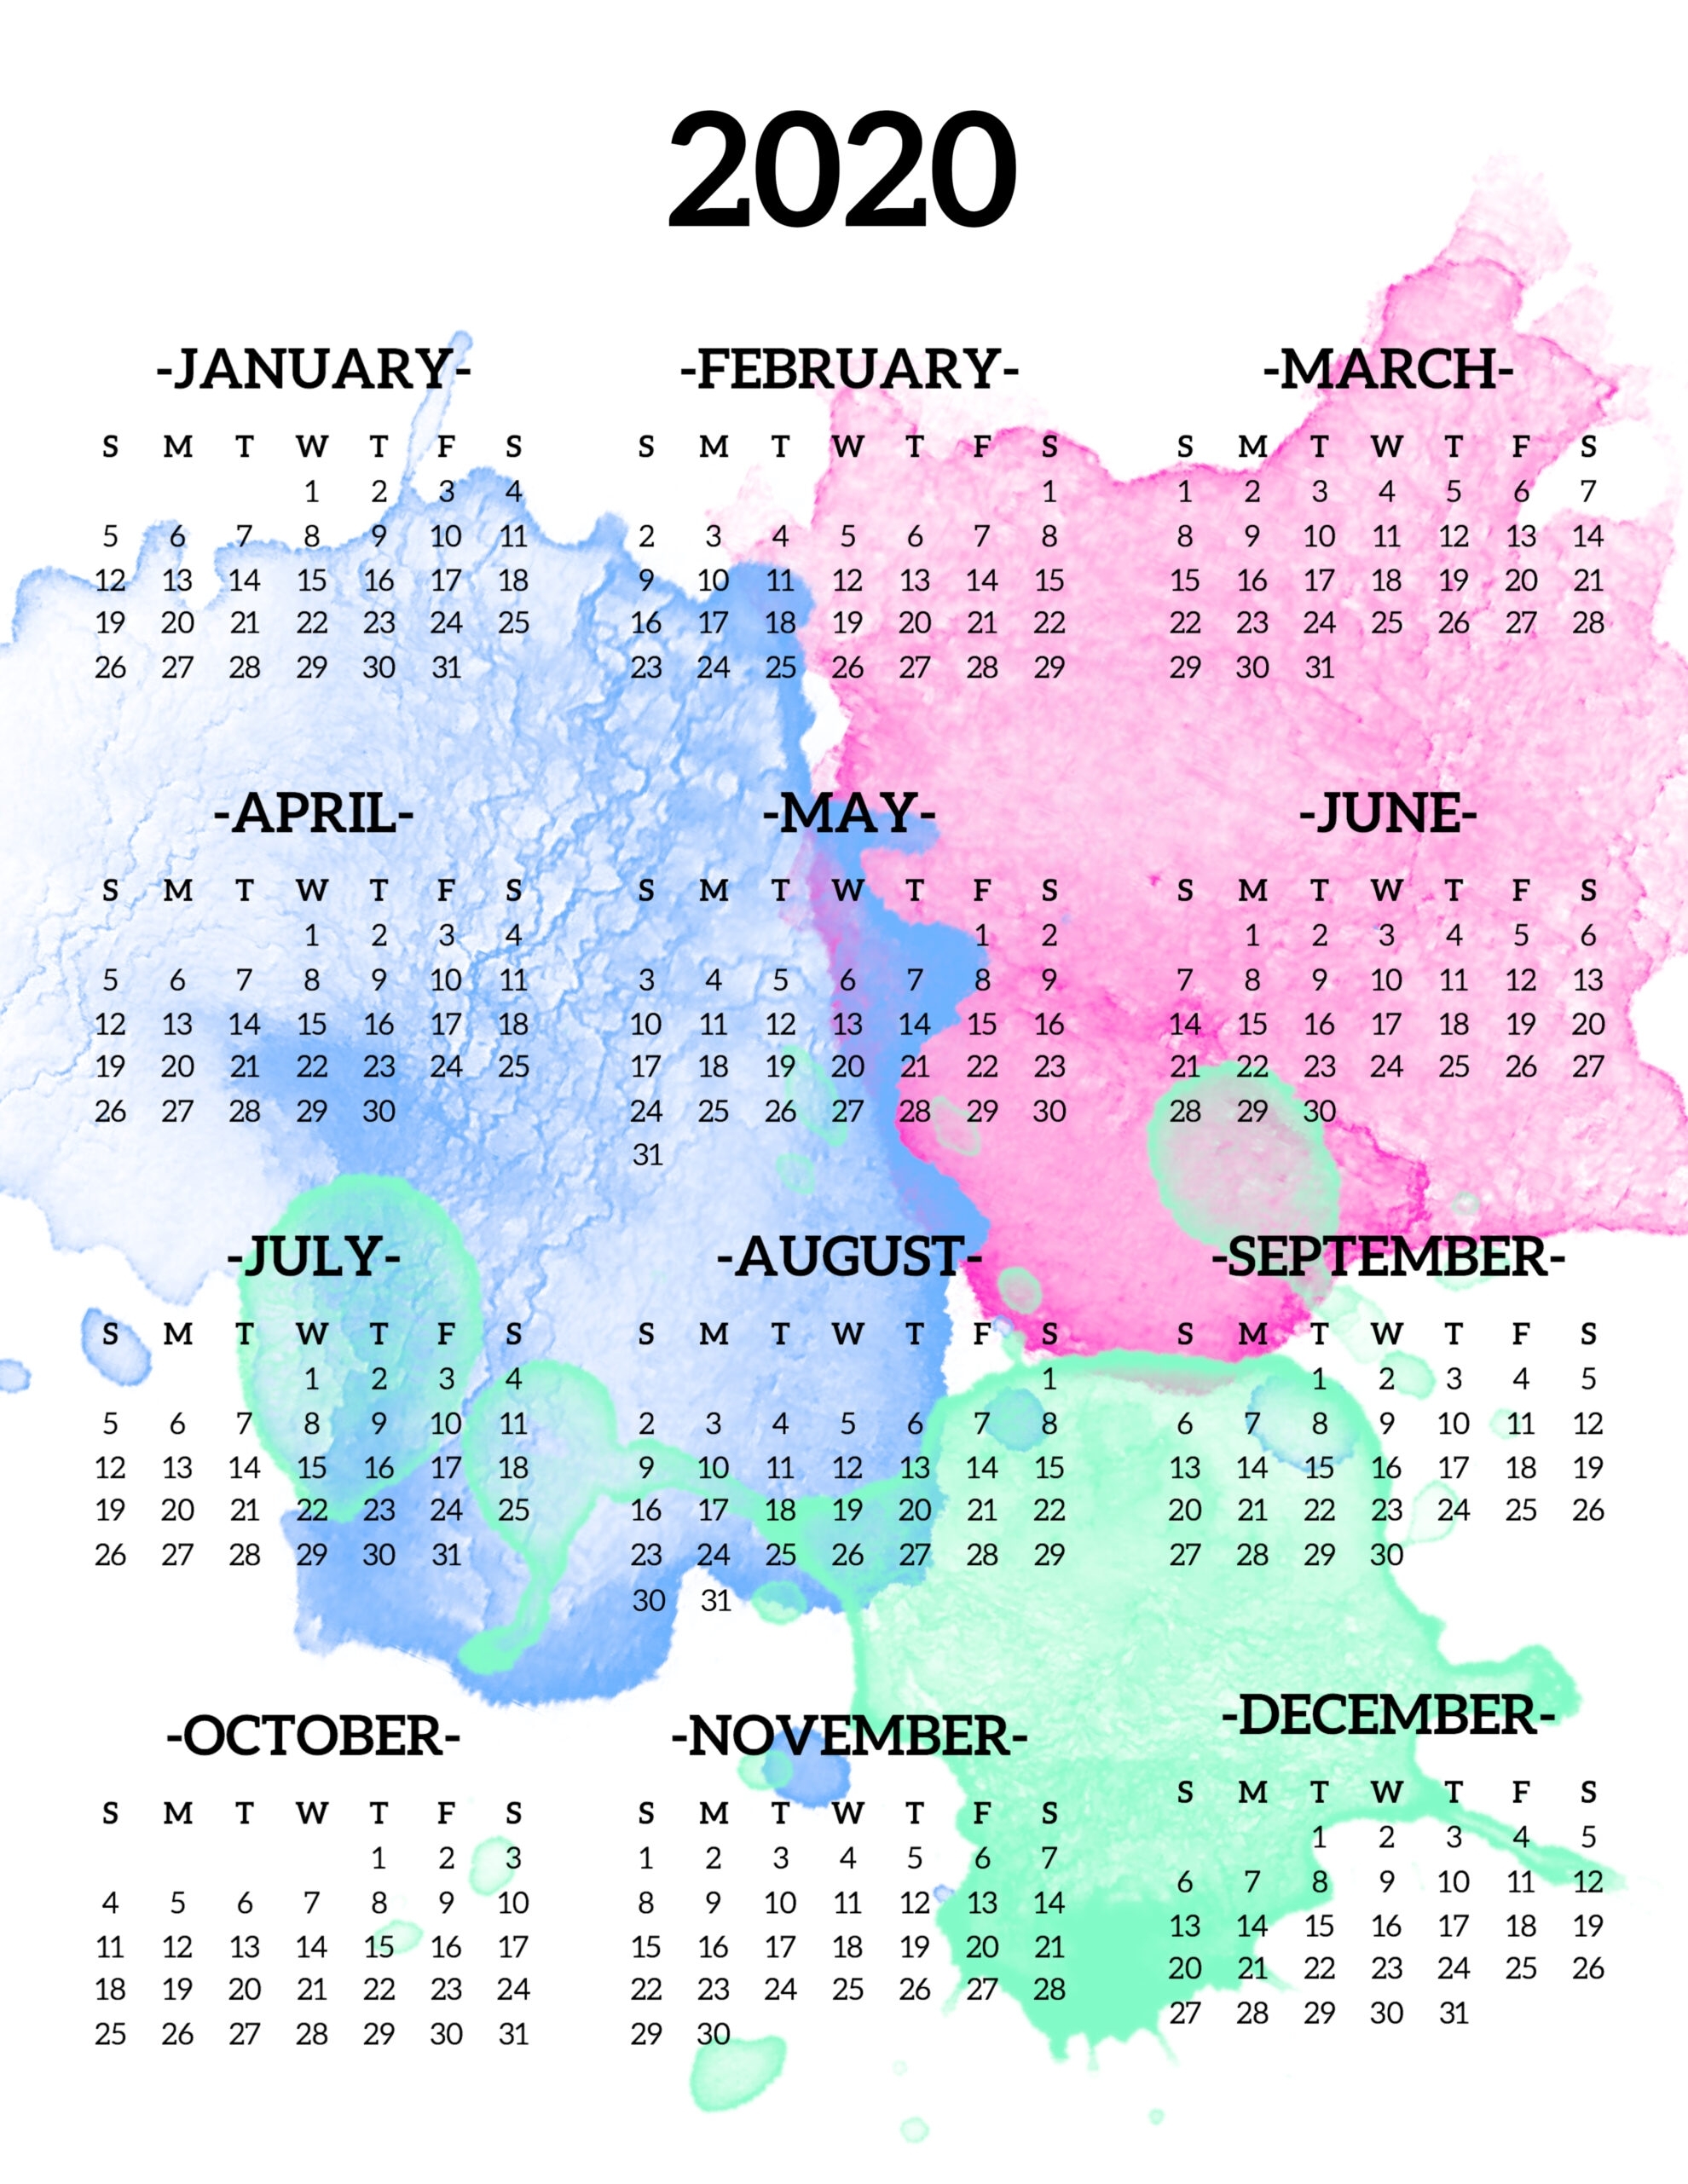 Calendar 2020 Printable One Page - Paper Trail Design for Printable 2020 Calendar Year At A Glance